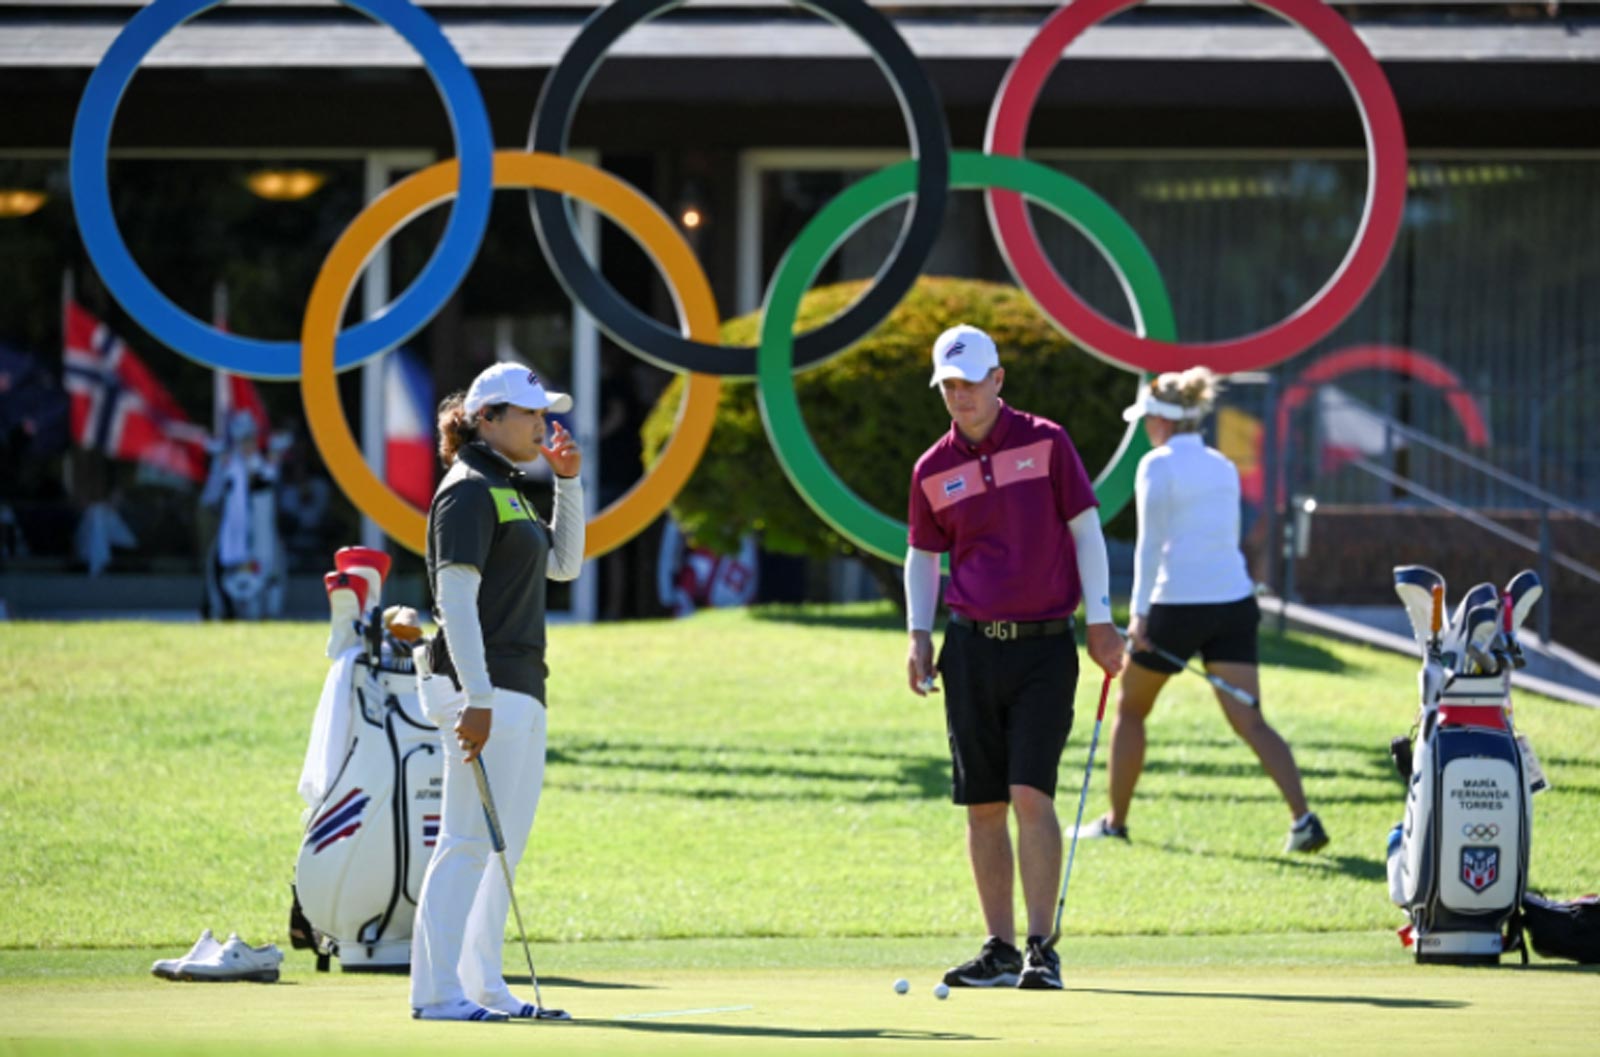 Golf in the Olympics has already been a win for women's golf and the